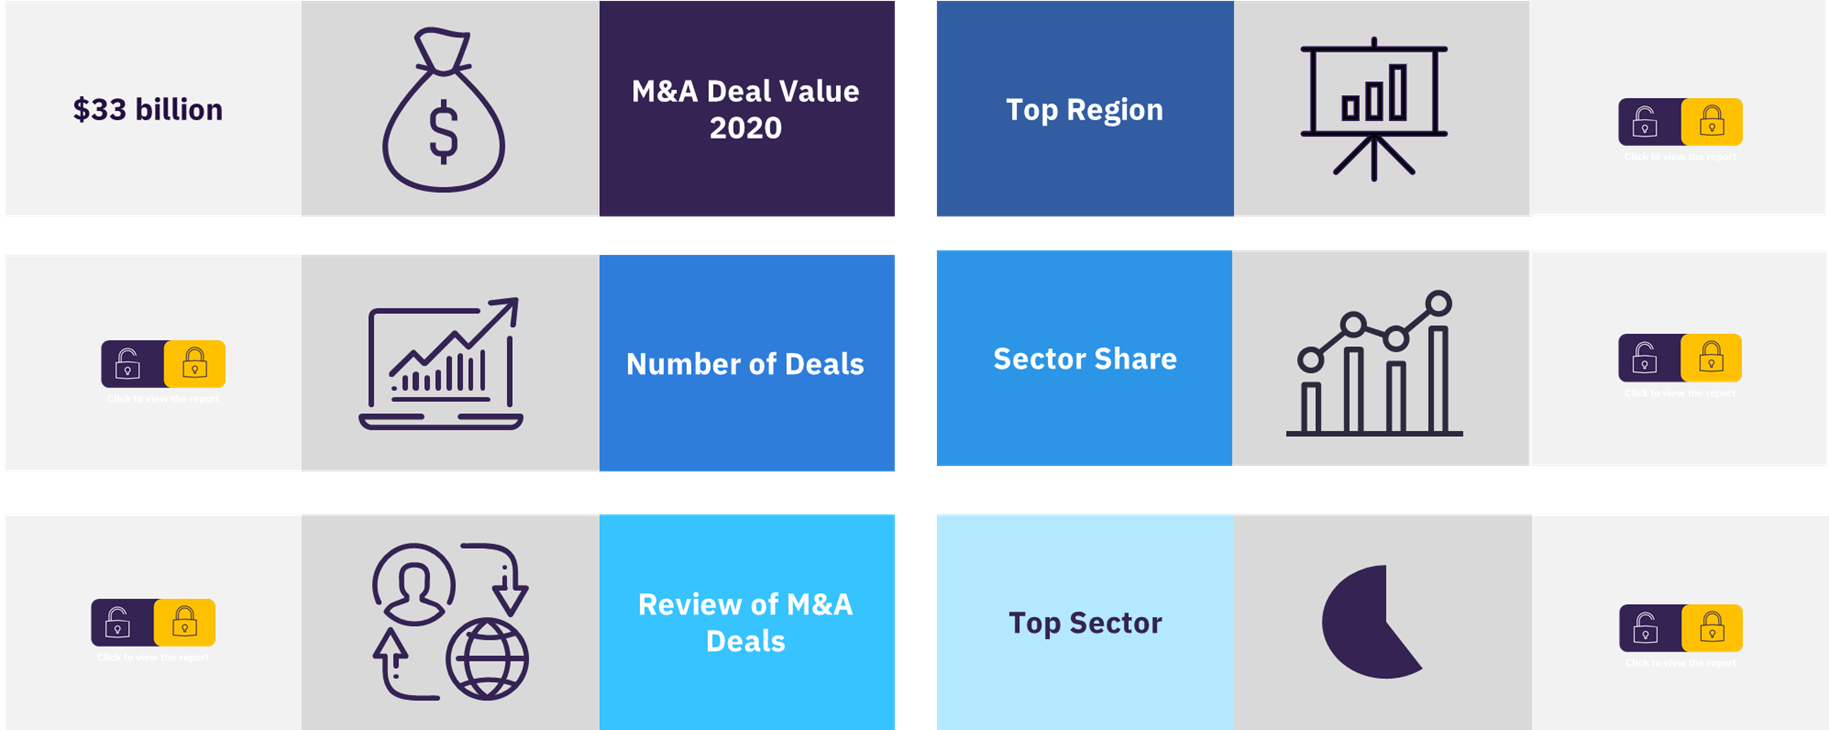 Overview of the global M&A deals in the aerospace, defence, and security sector